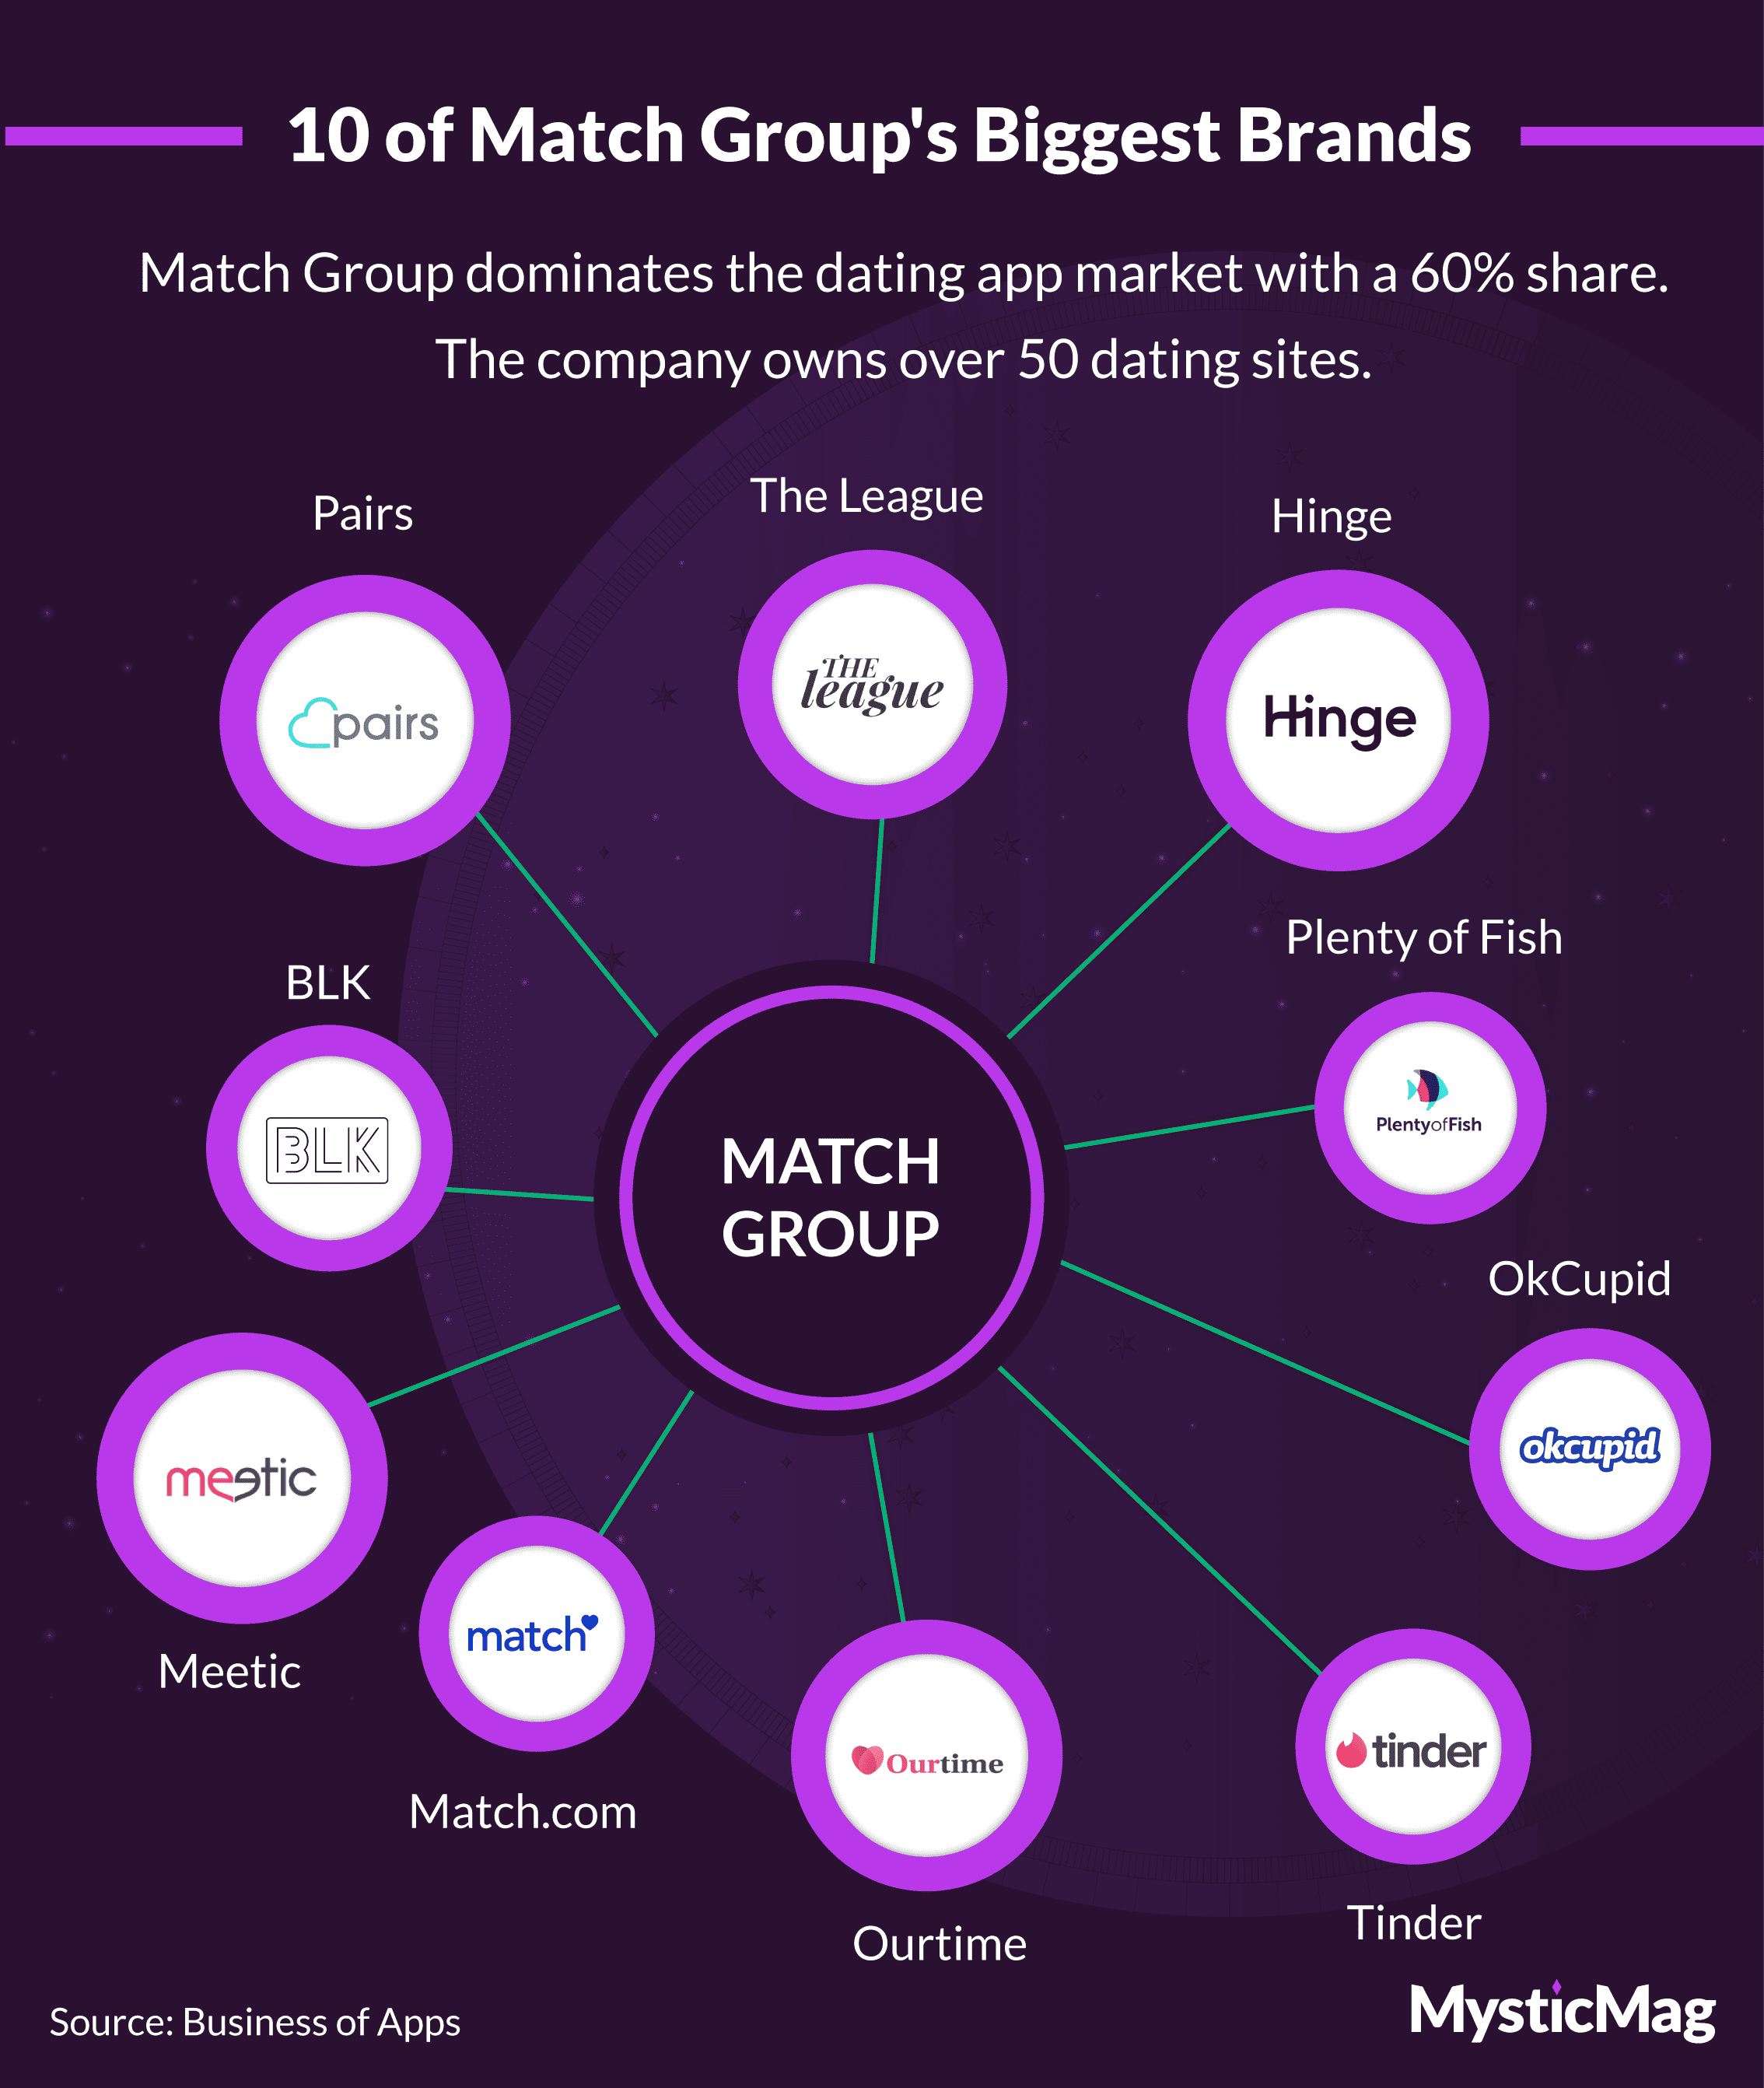 10 of match group's biggest brands